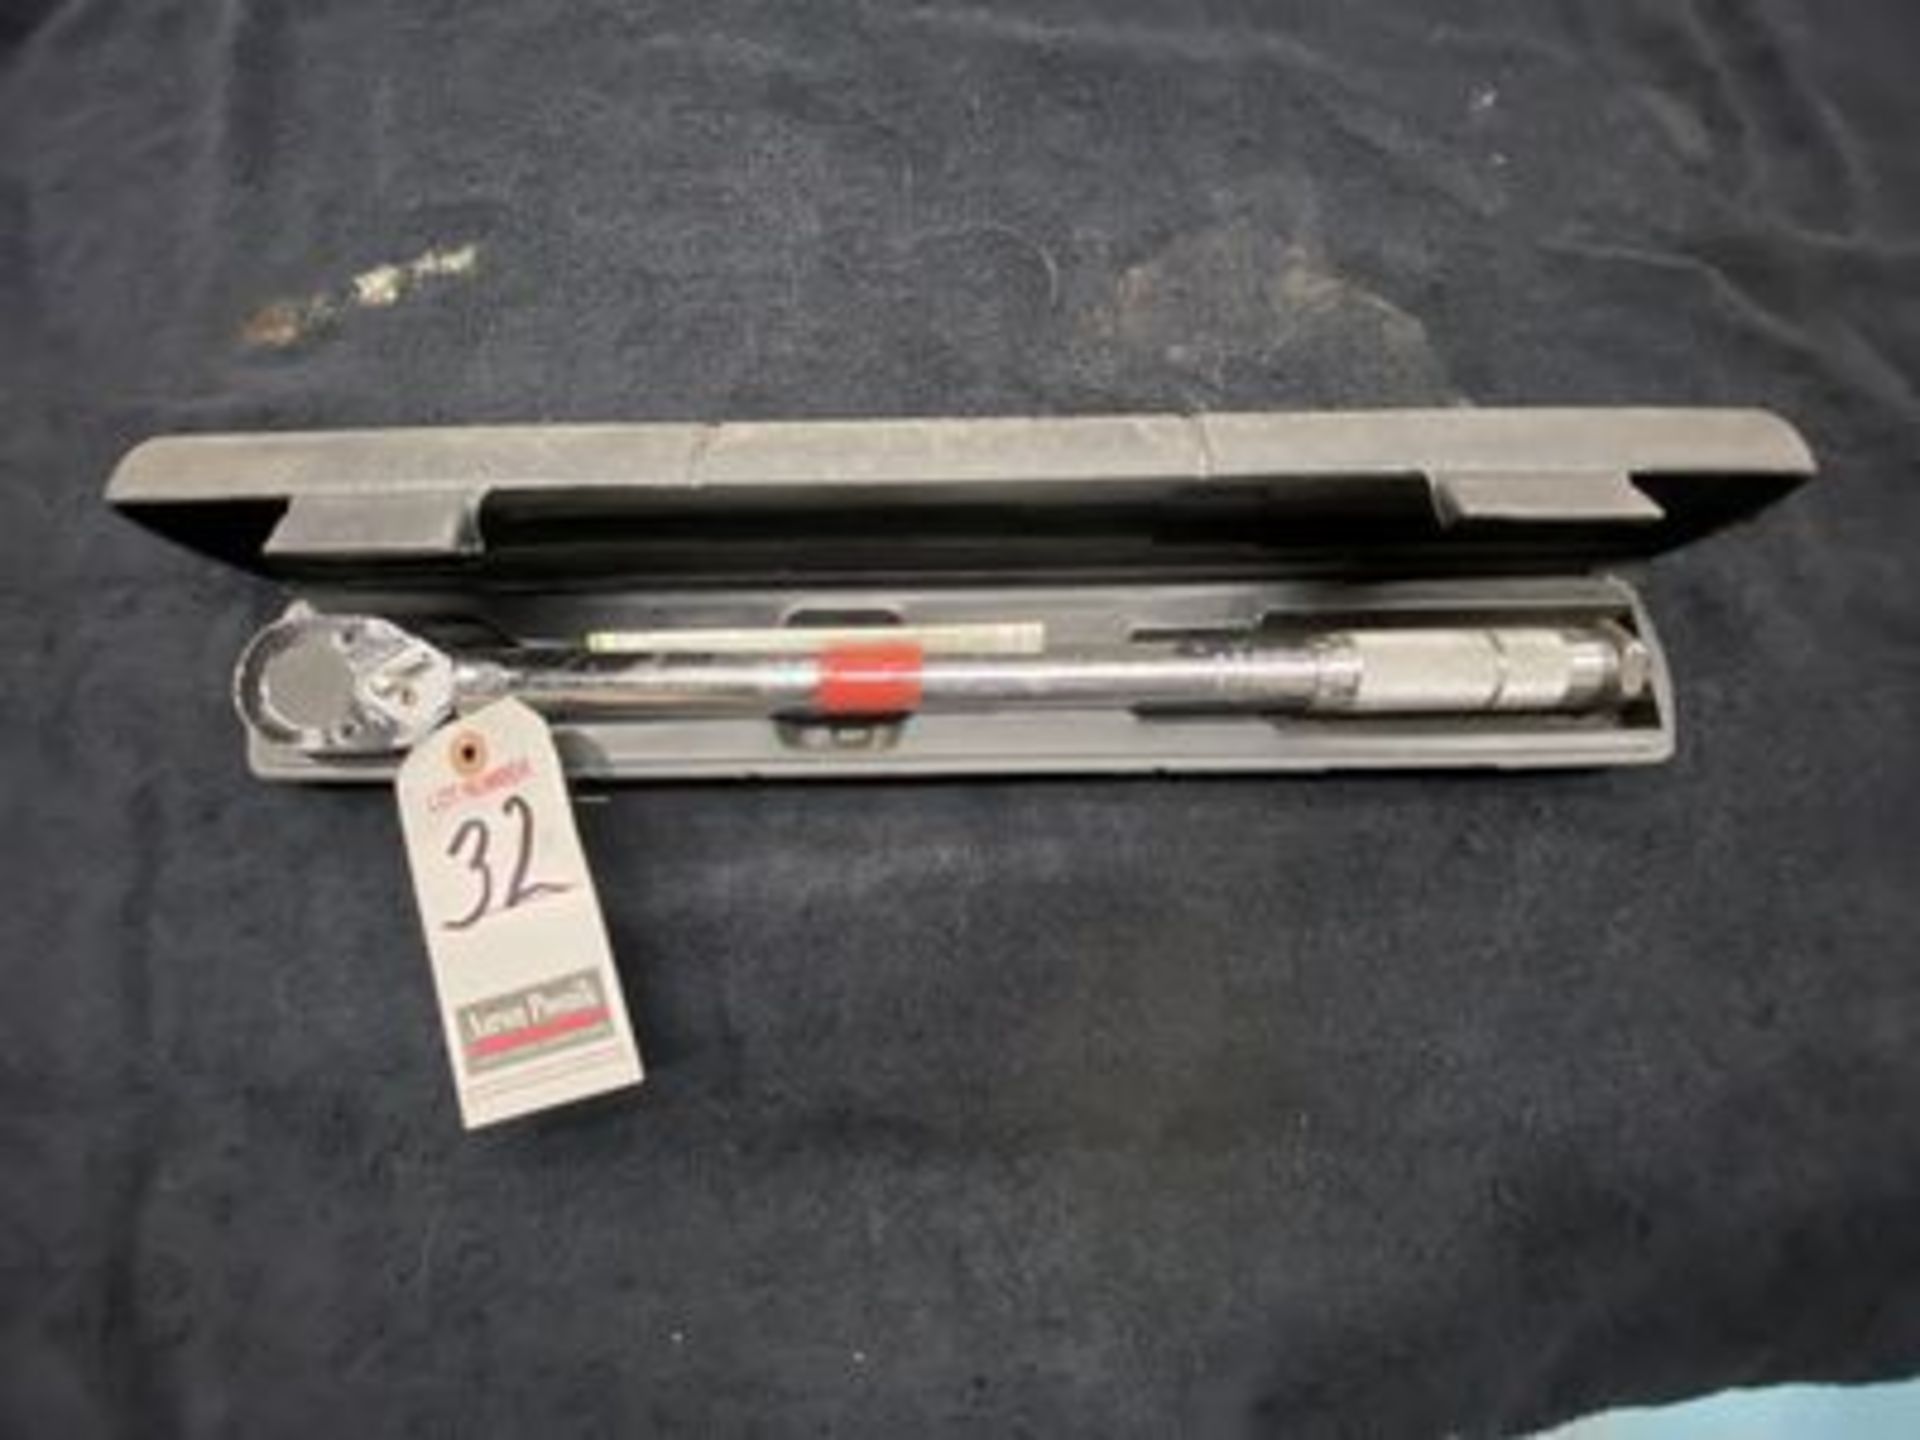 PITTSBURGH TORQUE WRENCH W/ CASE